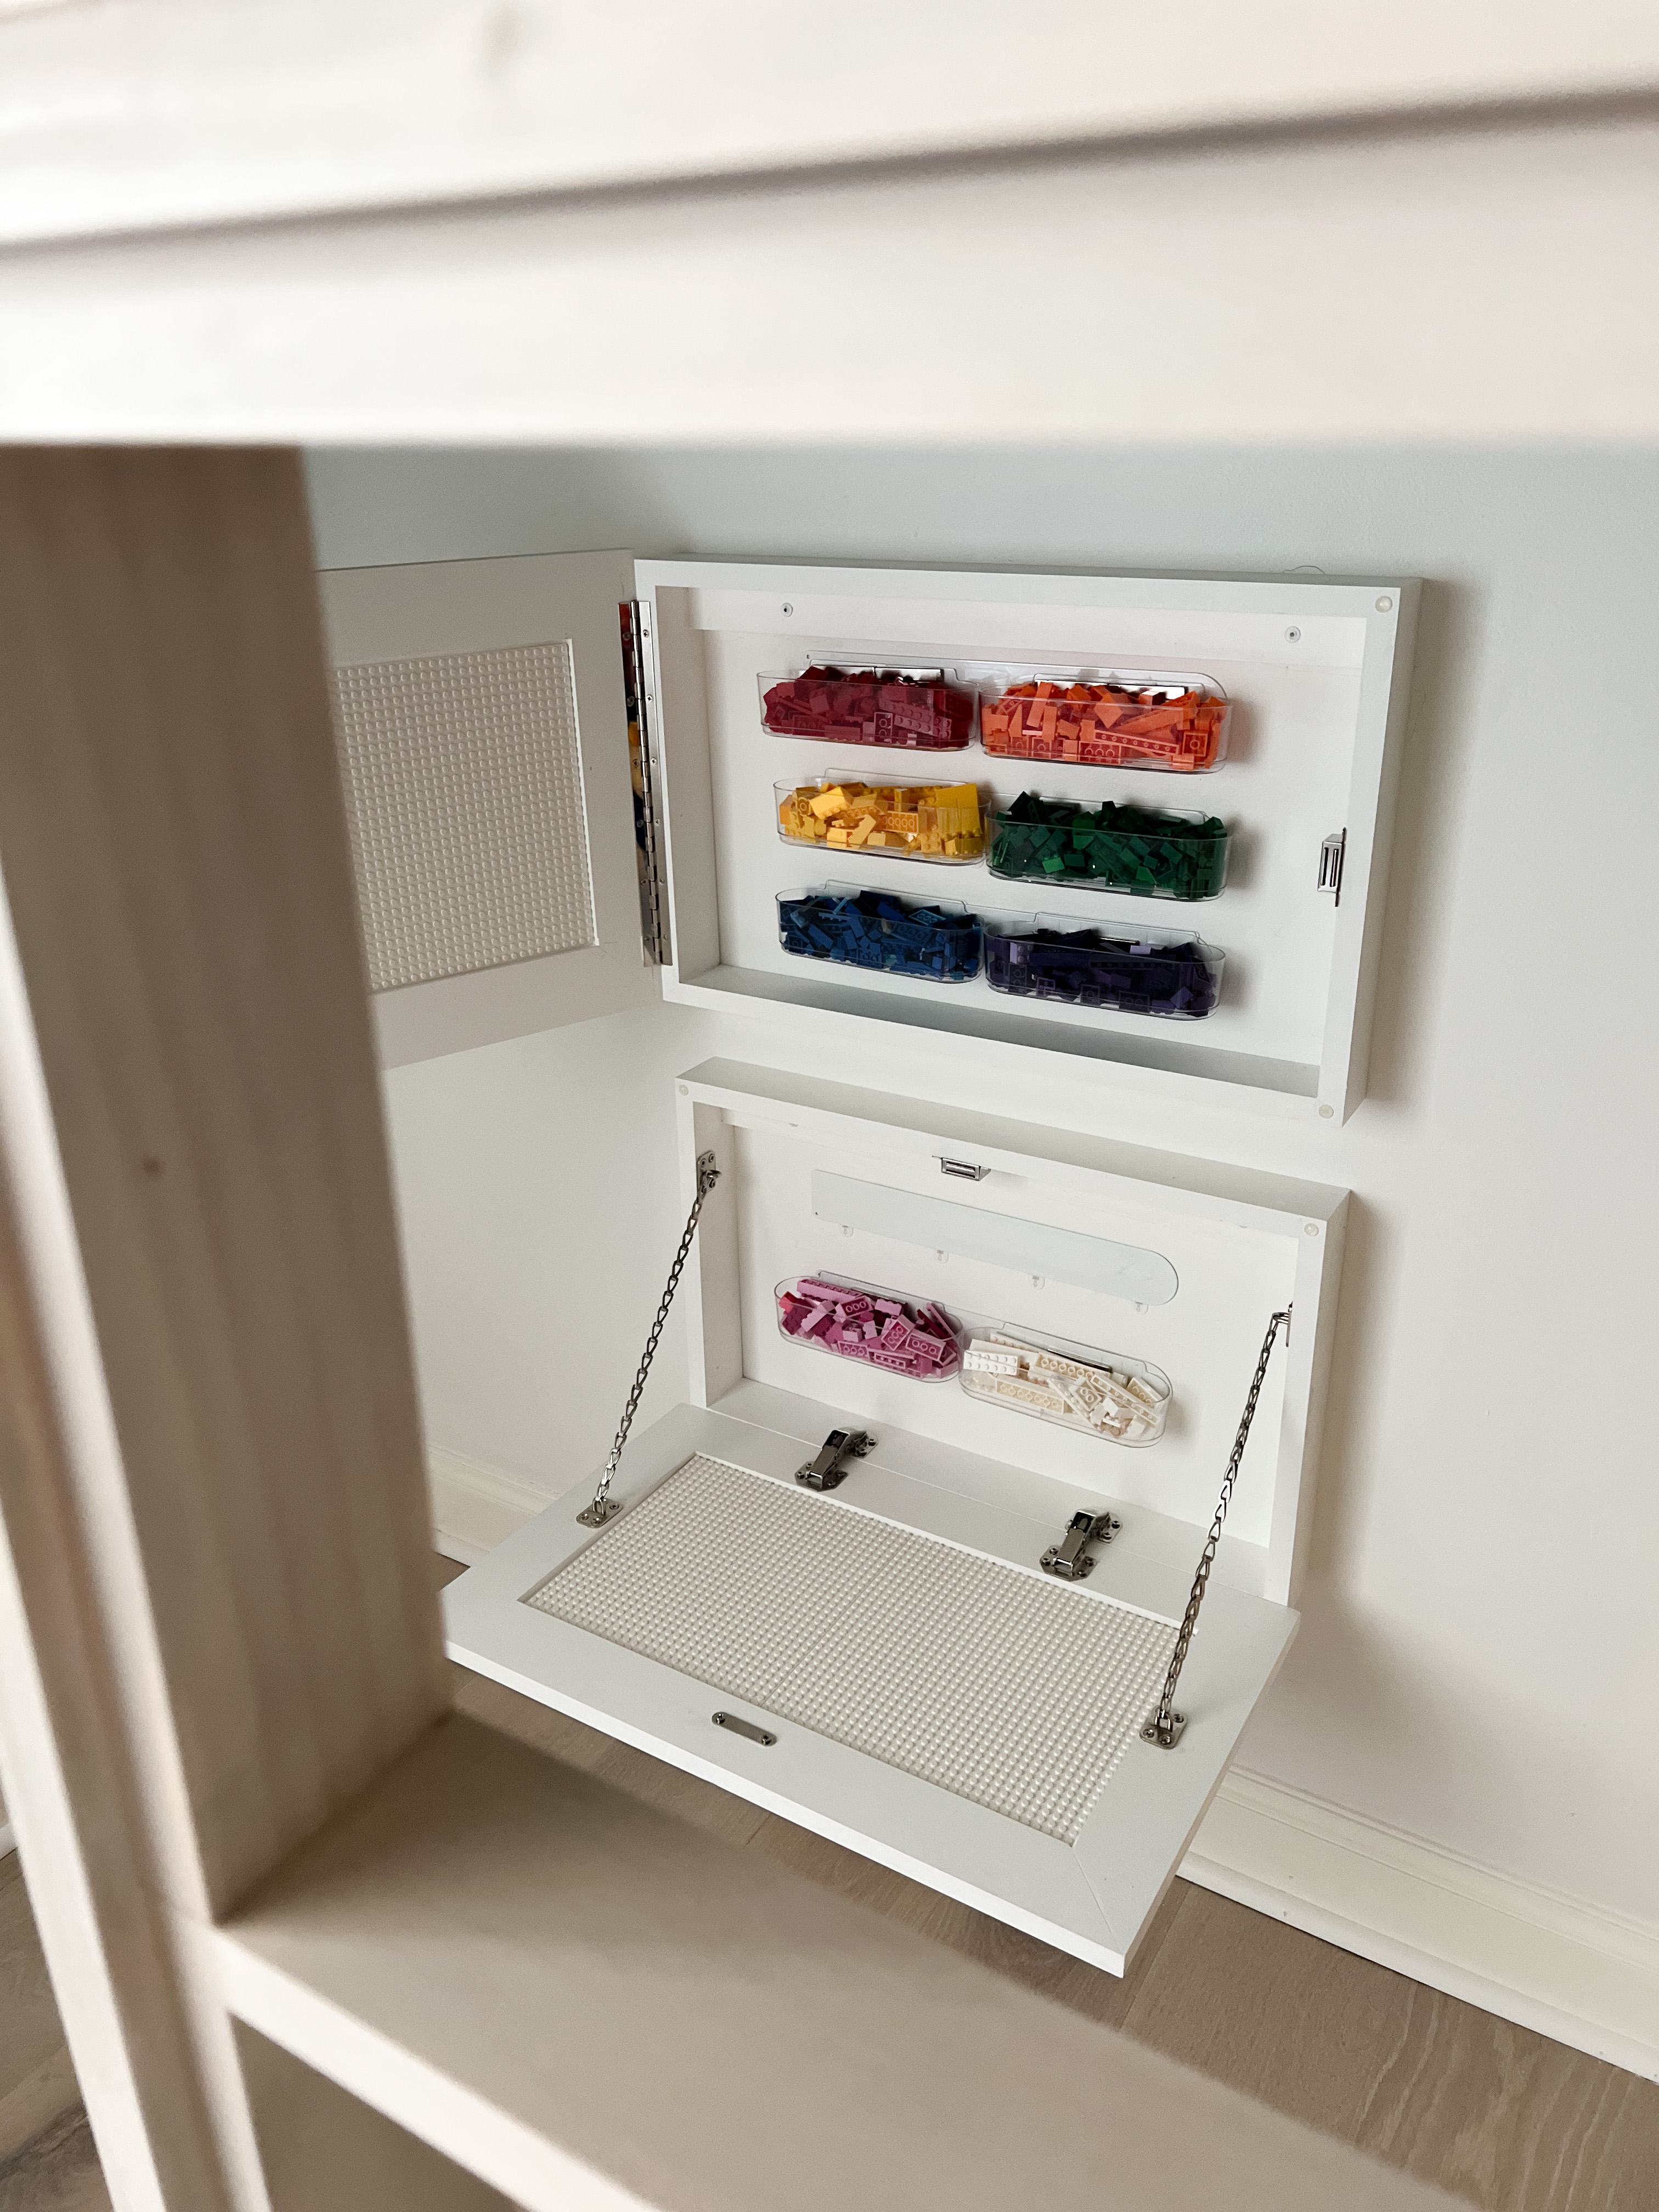 Image showing Hidden lego cabinets open, with legos inside.